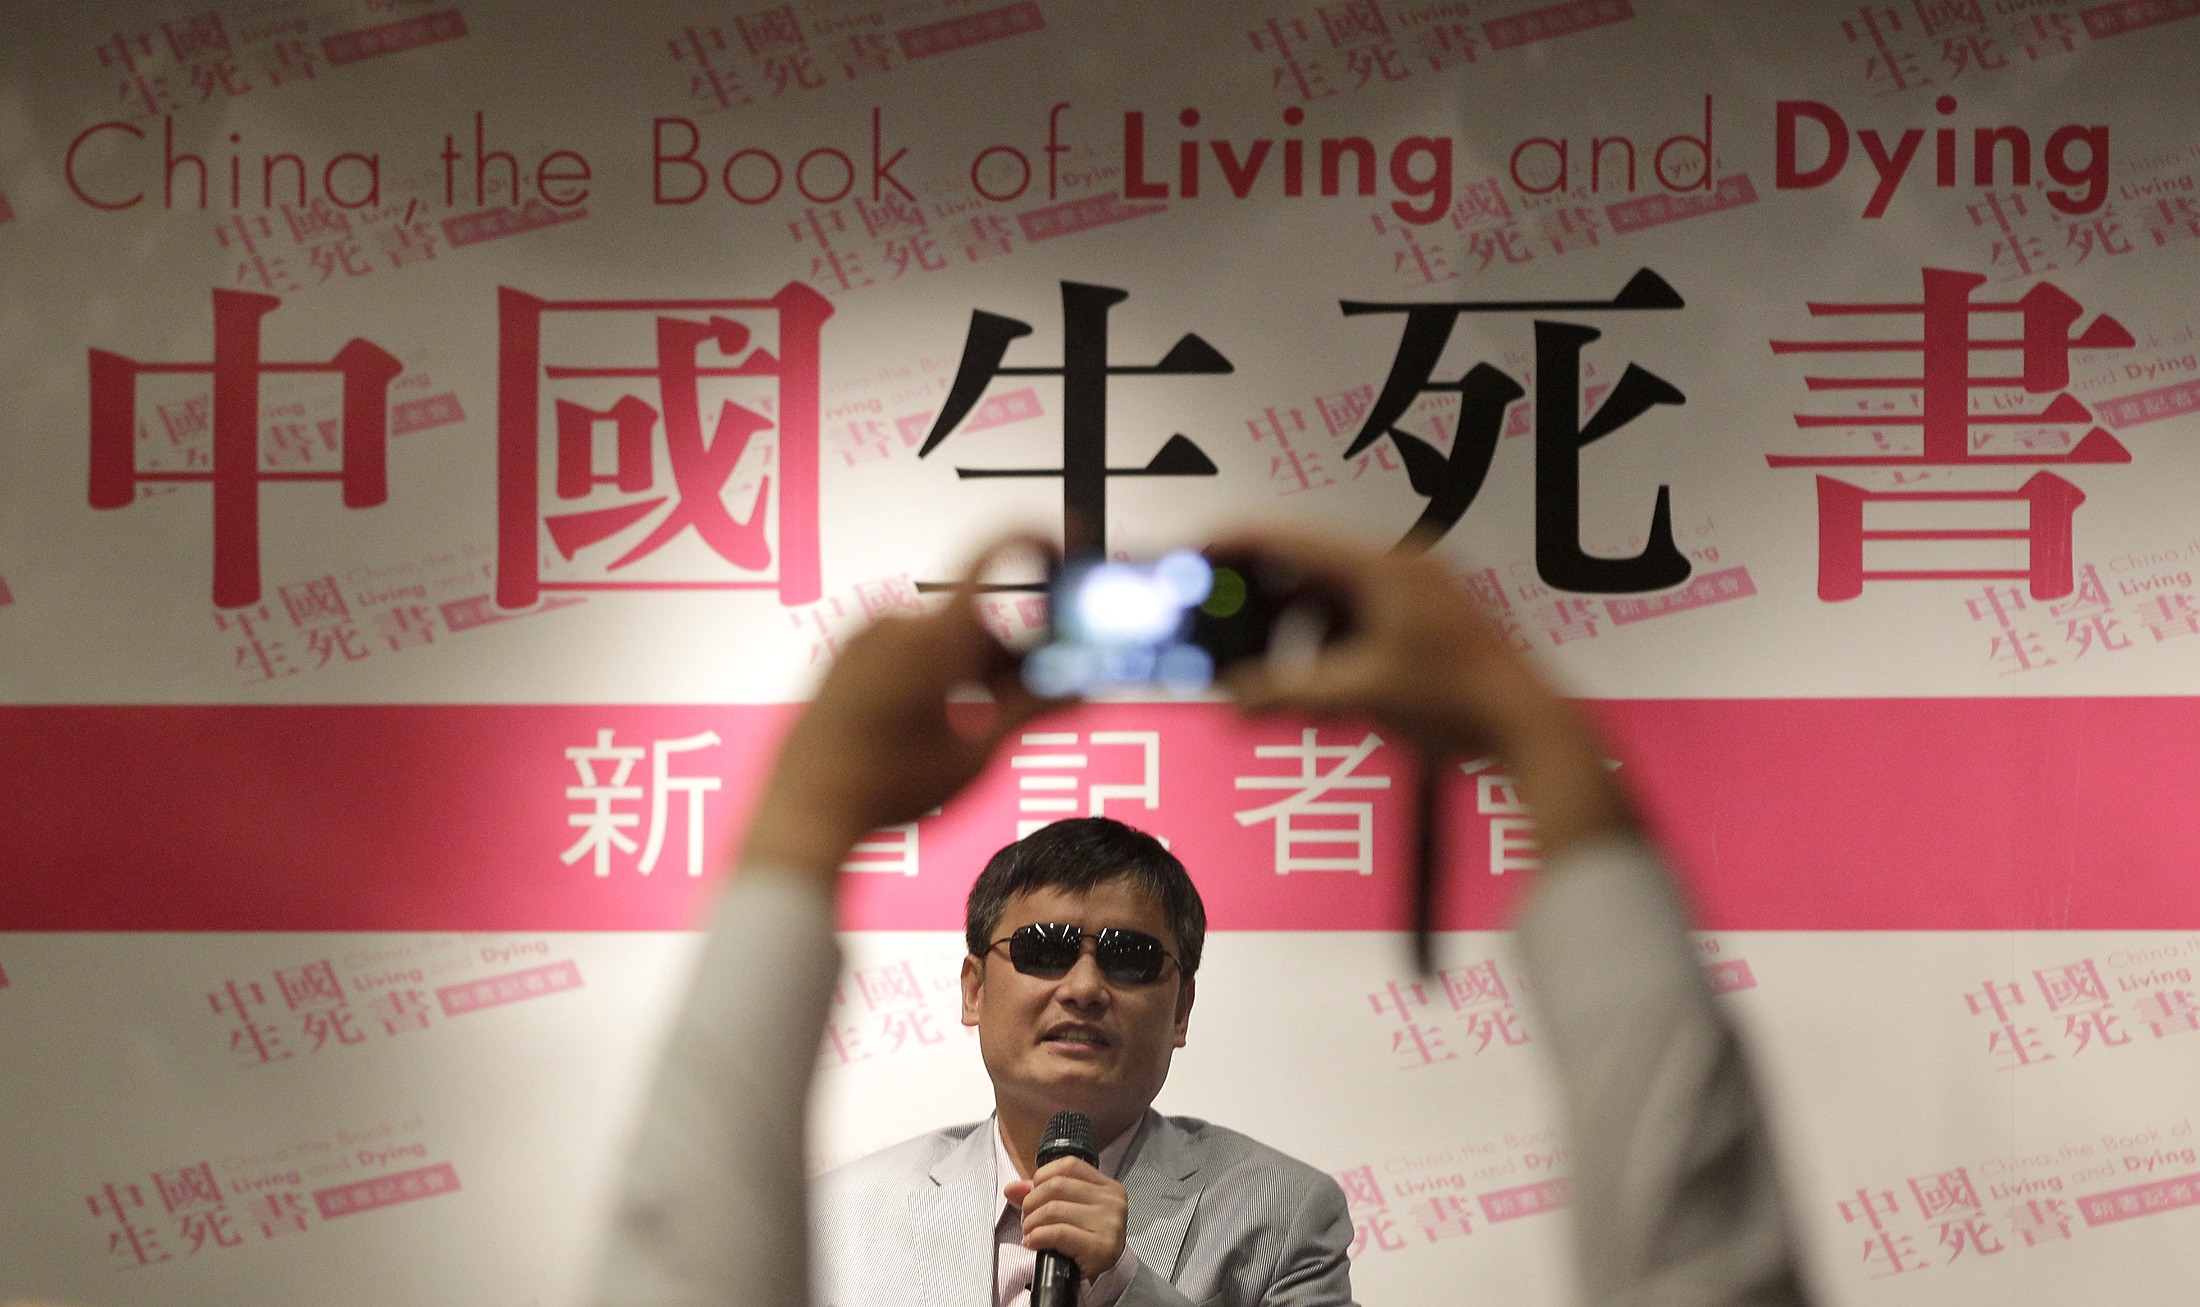 Chinese dissident Chen Guangcheng talks as he attends the book release event for "China, the Book of Living and Dying" in Taipei June 27, 2013. Photo: Reuters